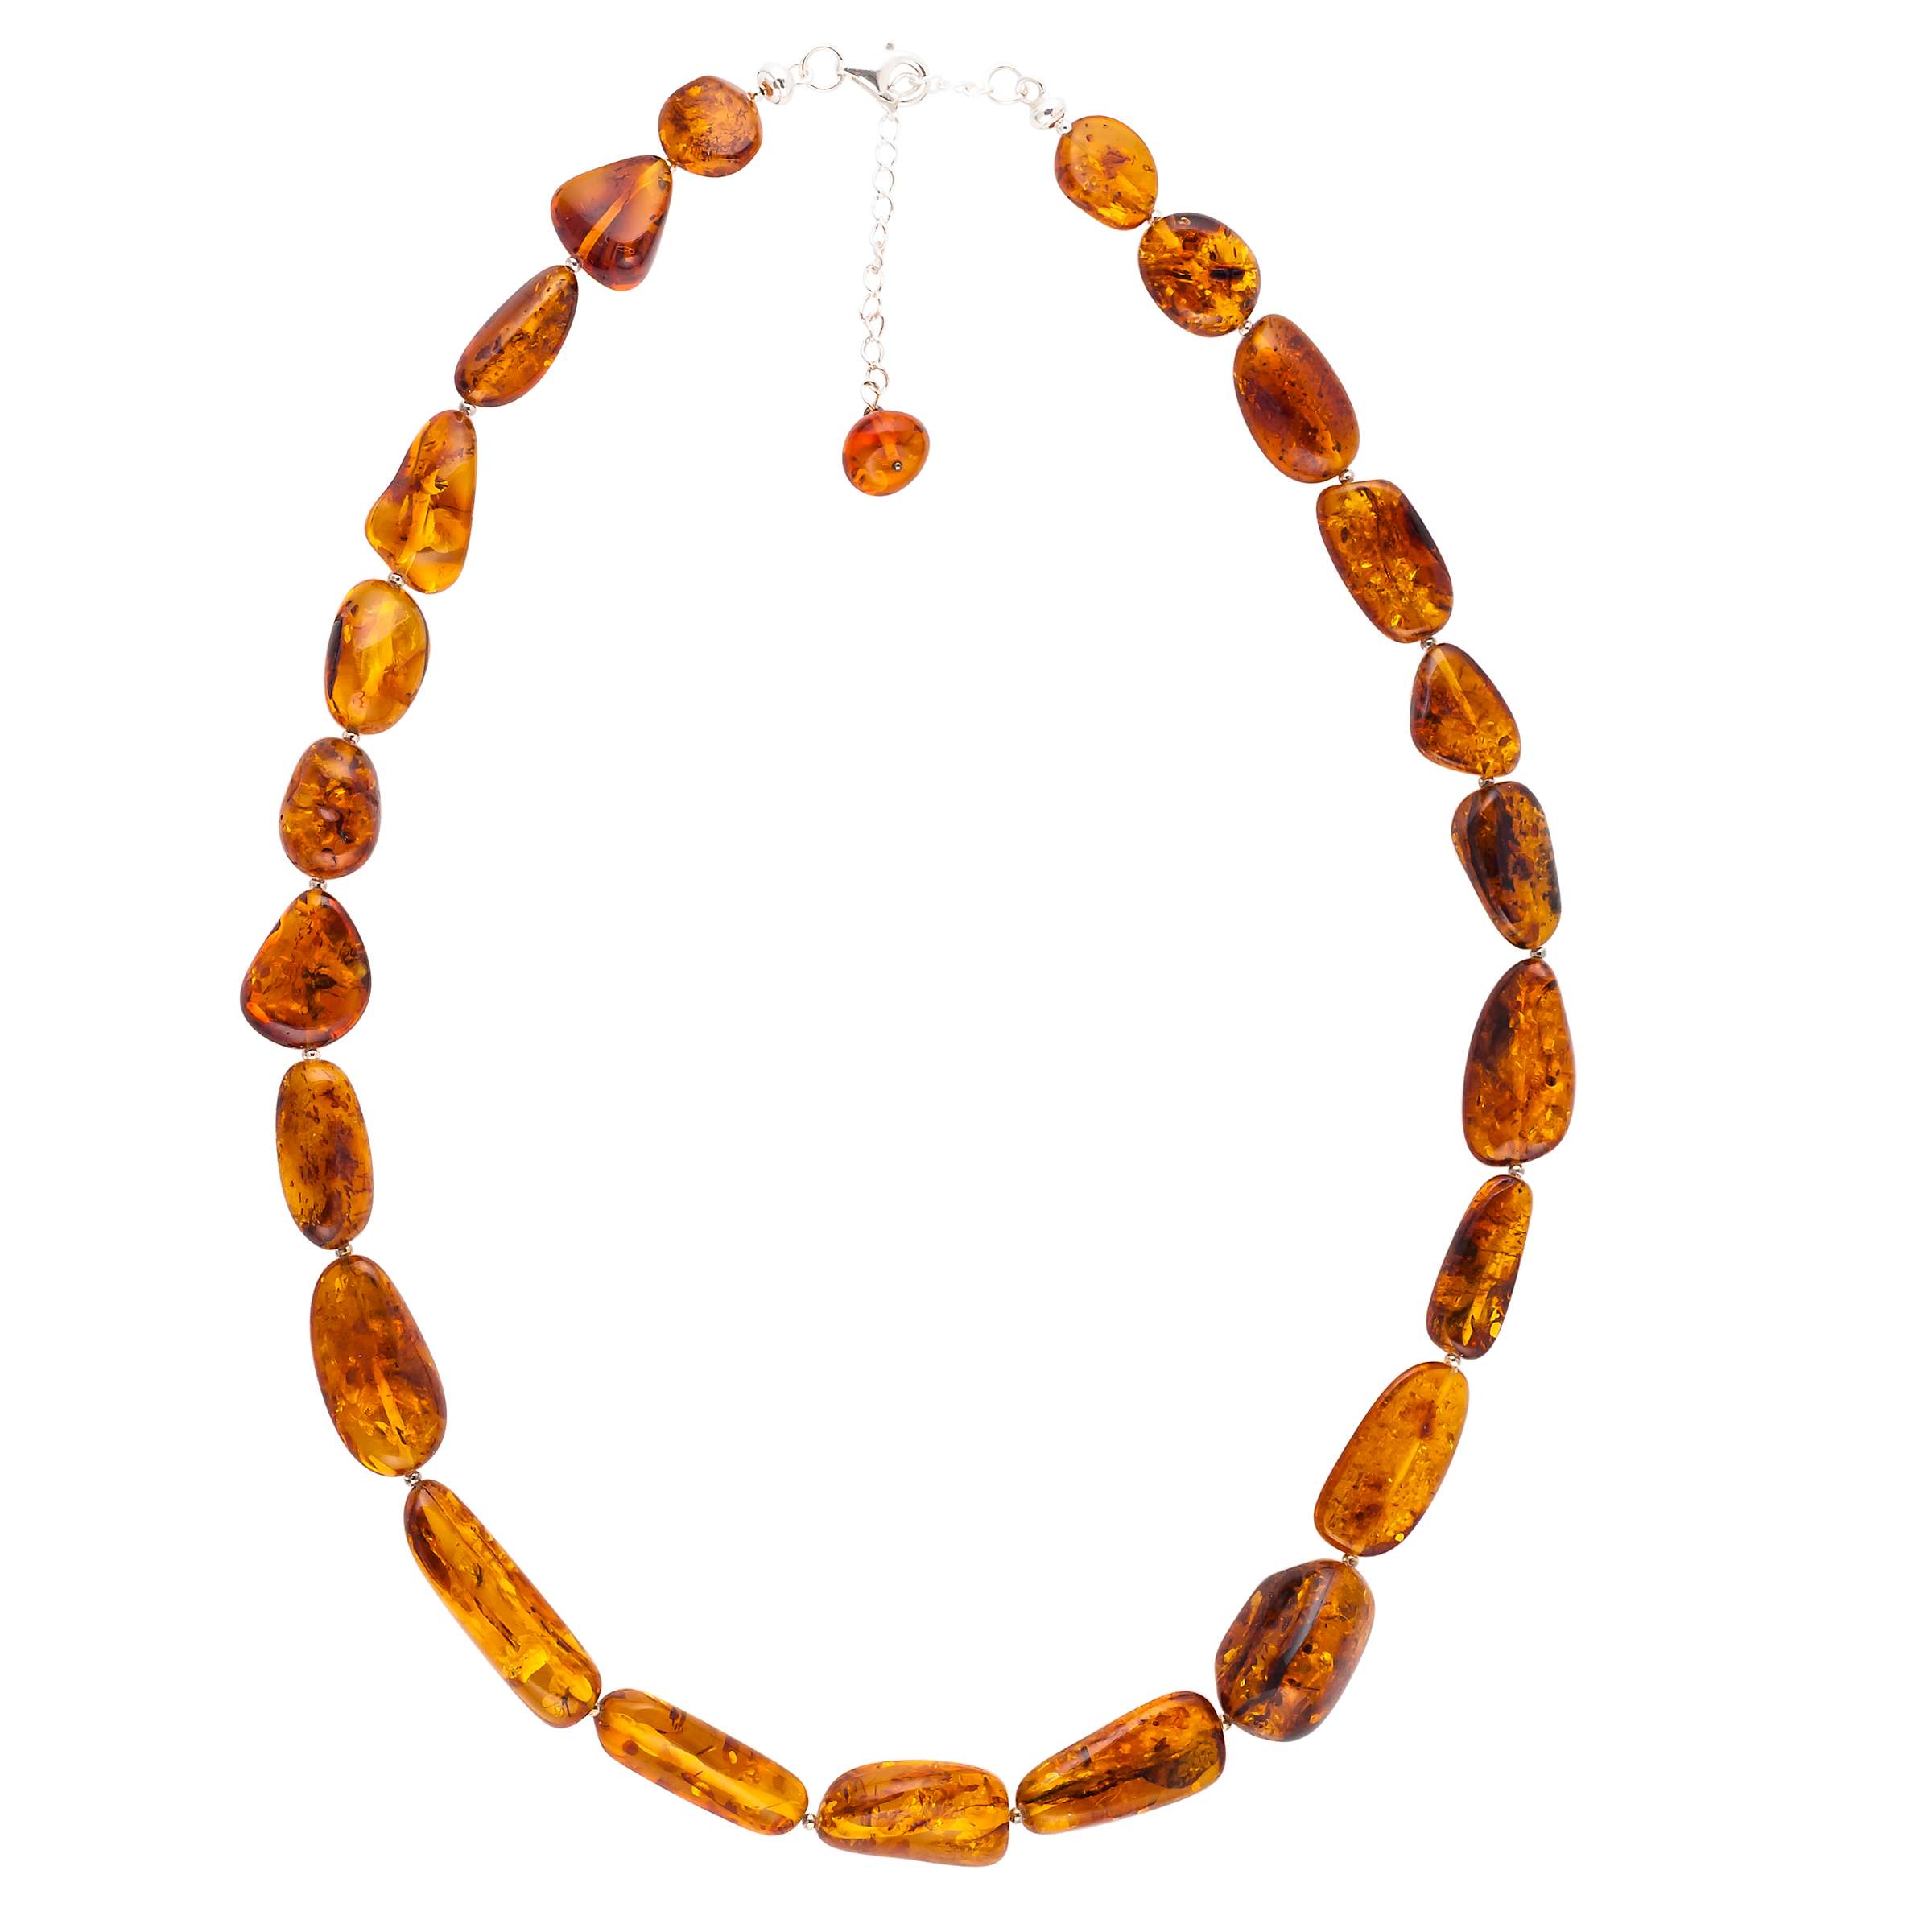 Buy Be-jewelled Amber Necklace Sterling Silver Clasp, Cognac Online at johnlewis.com